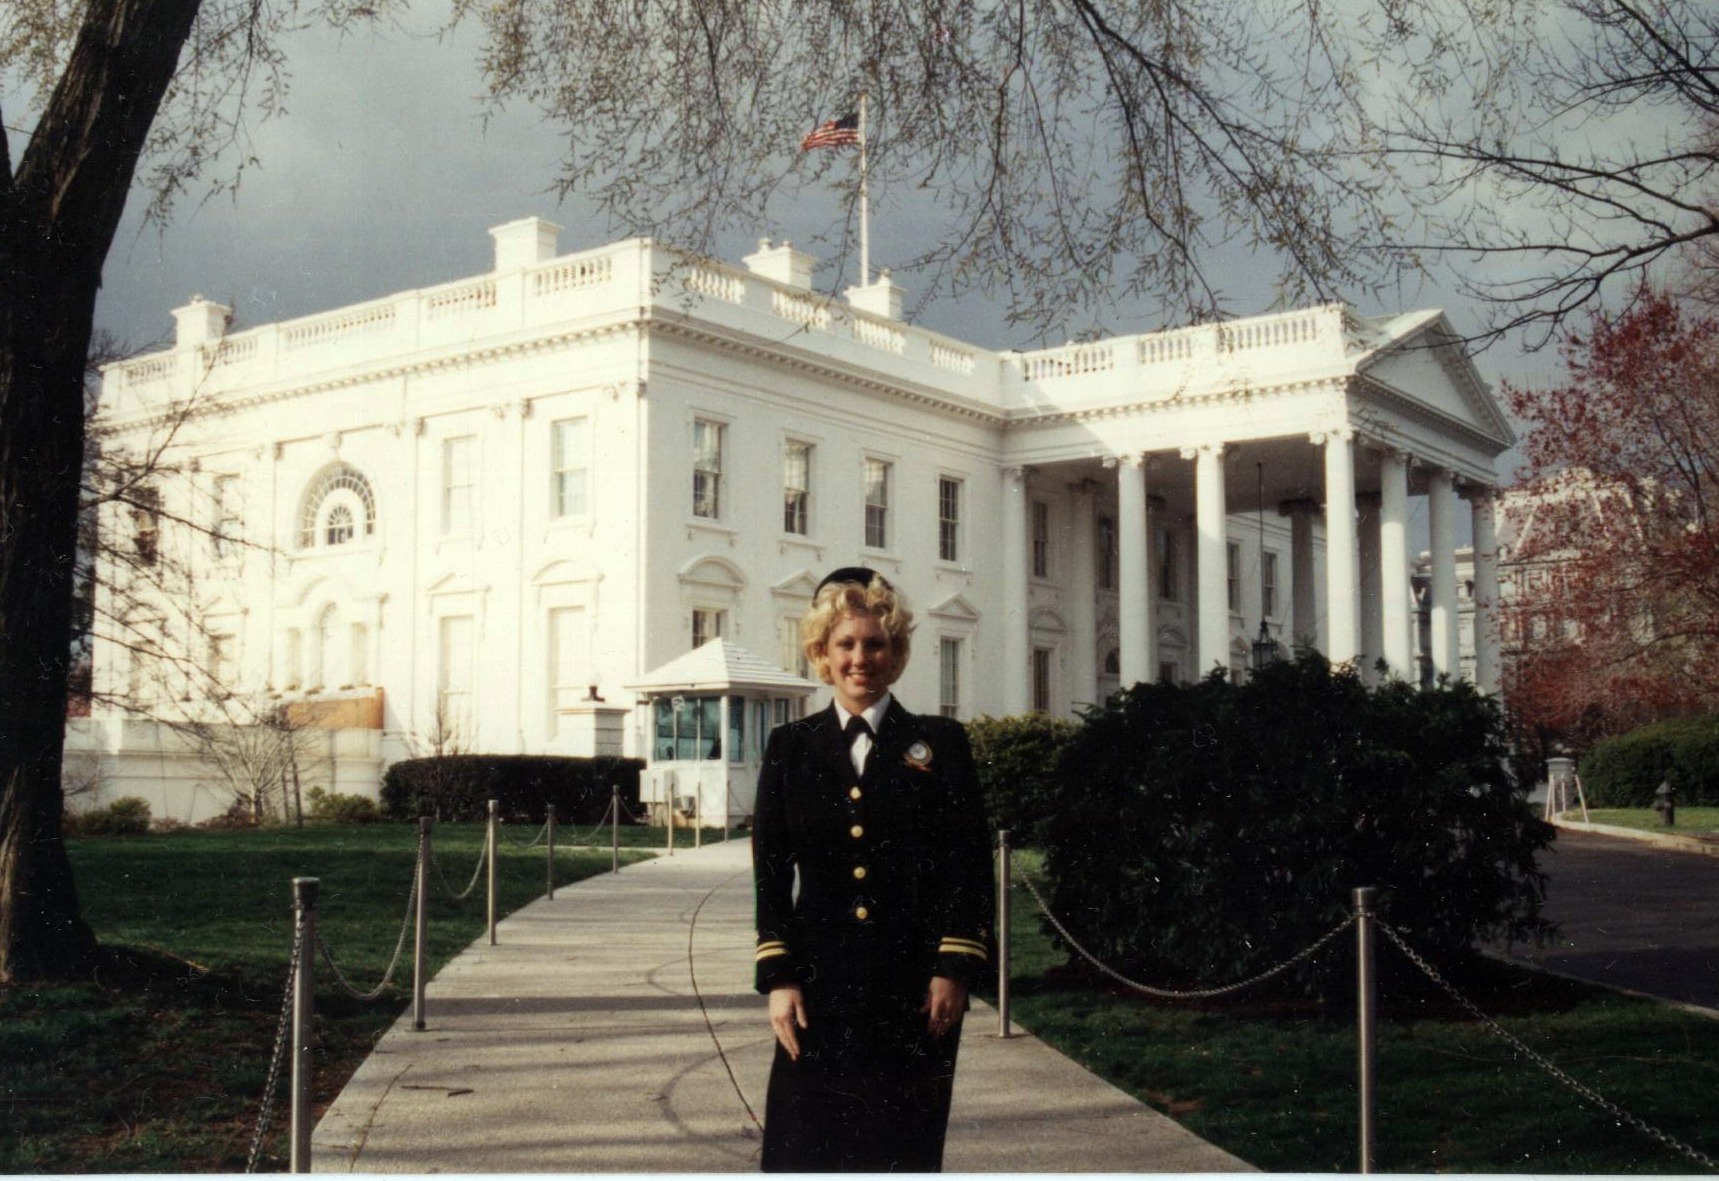 Lieutenant, United States Navy, on an official White House Tour